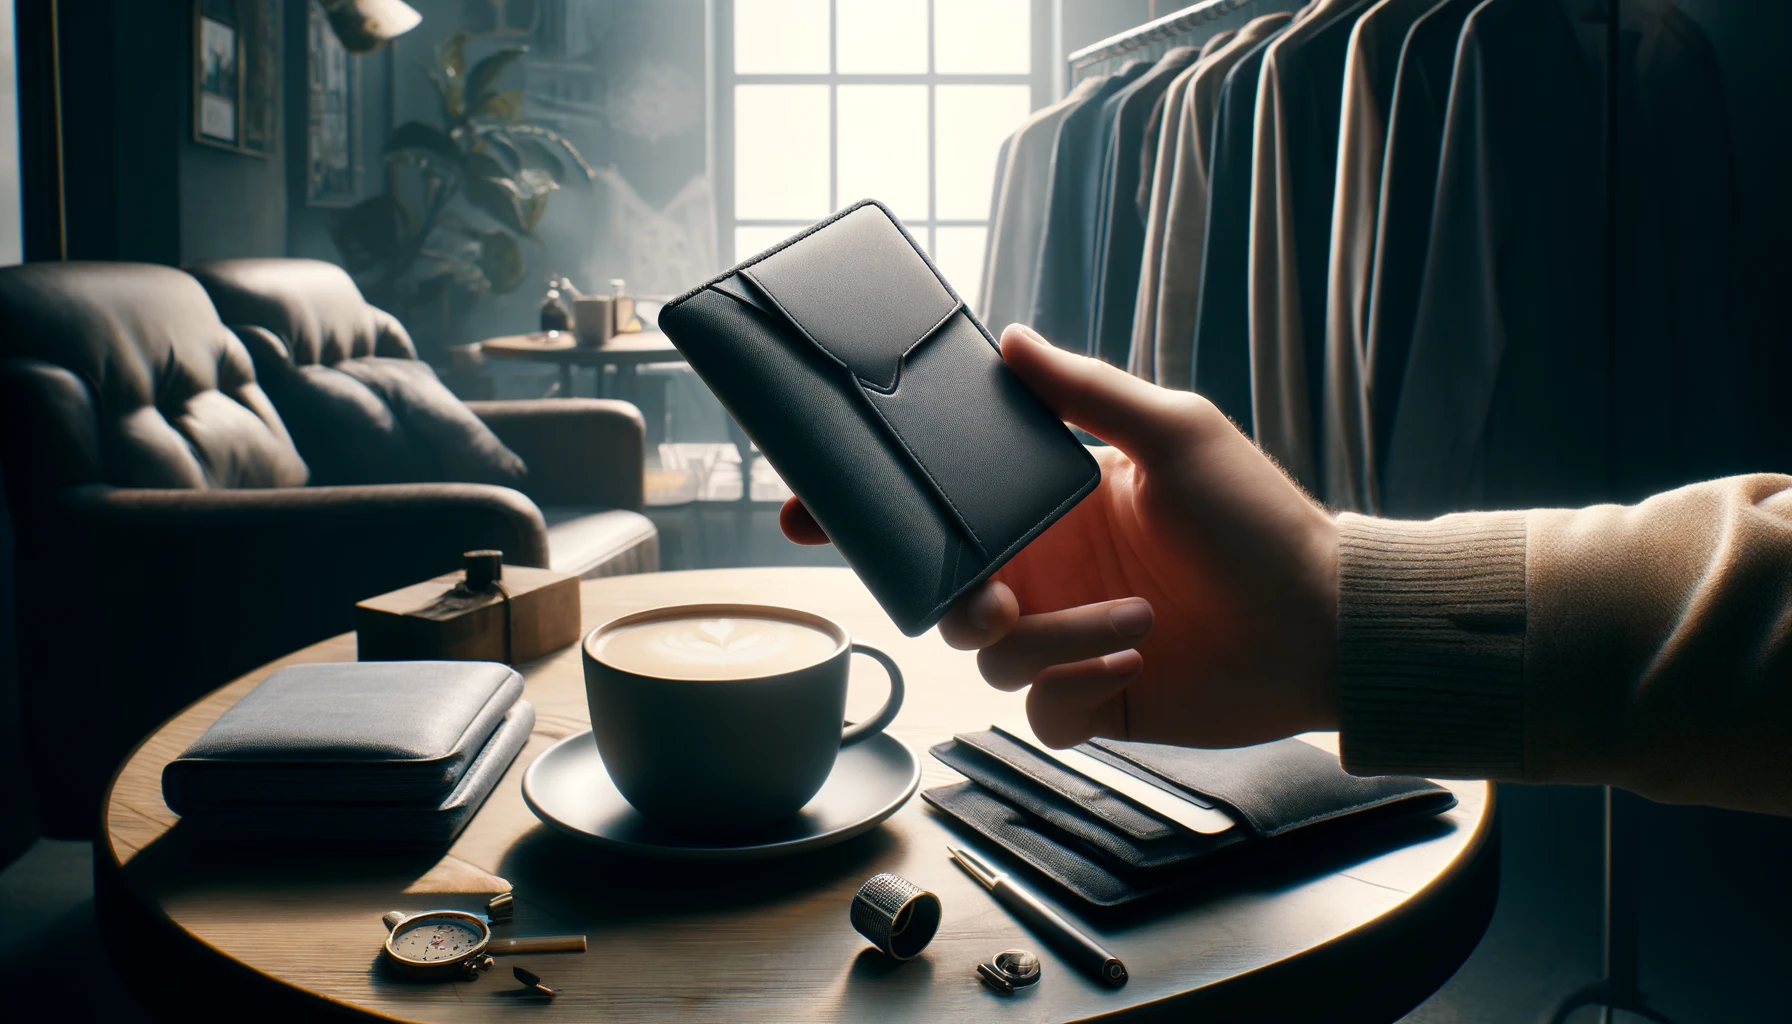 Create an image that captures the essence of a slim wallet designed to seamlessly integrate into daily life, highlighting its practical and stylish design. The wallet is depicted in various everyday scenarios, such as being placed on a cafe table next to a cup of coffee, tucked into the pocket of a casual jacket hanging on a chair, or being held in hand while shopping. Its design is modern and minimalist, appealing to a broad audience with its sleek lines and subtle elegance. The material of the wallet looks durable and sophisticated, suggesting that it is not only functional but also a fashionable accessory. The background scenes are relatable and cozy, emphasizing the wallet's adaptability to different lifestyles and its role in the simplification of daily routines. This 16:9 image aims to convey the idea that this slim wallet is not just a practical item for carrying essentials but also a stylish complement to any outfit, perfect for the modern individual on the go.